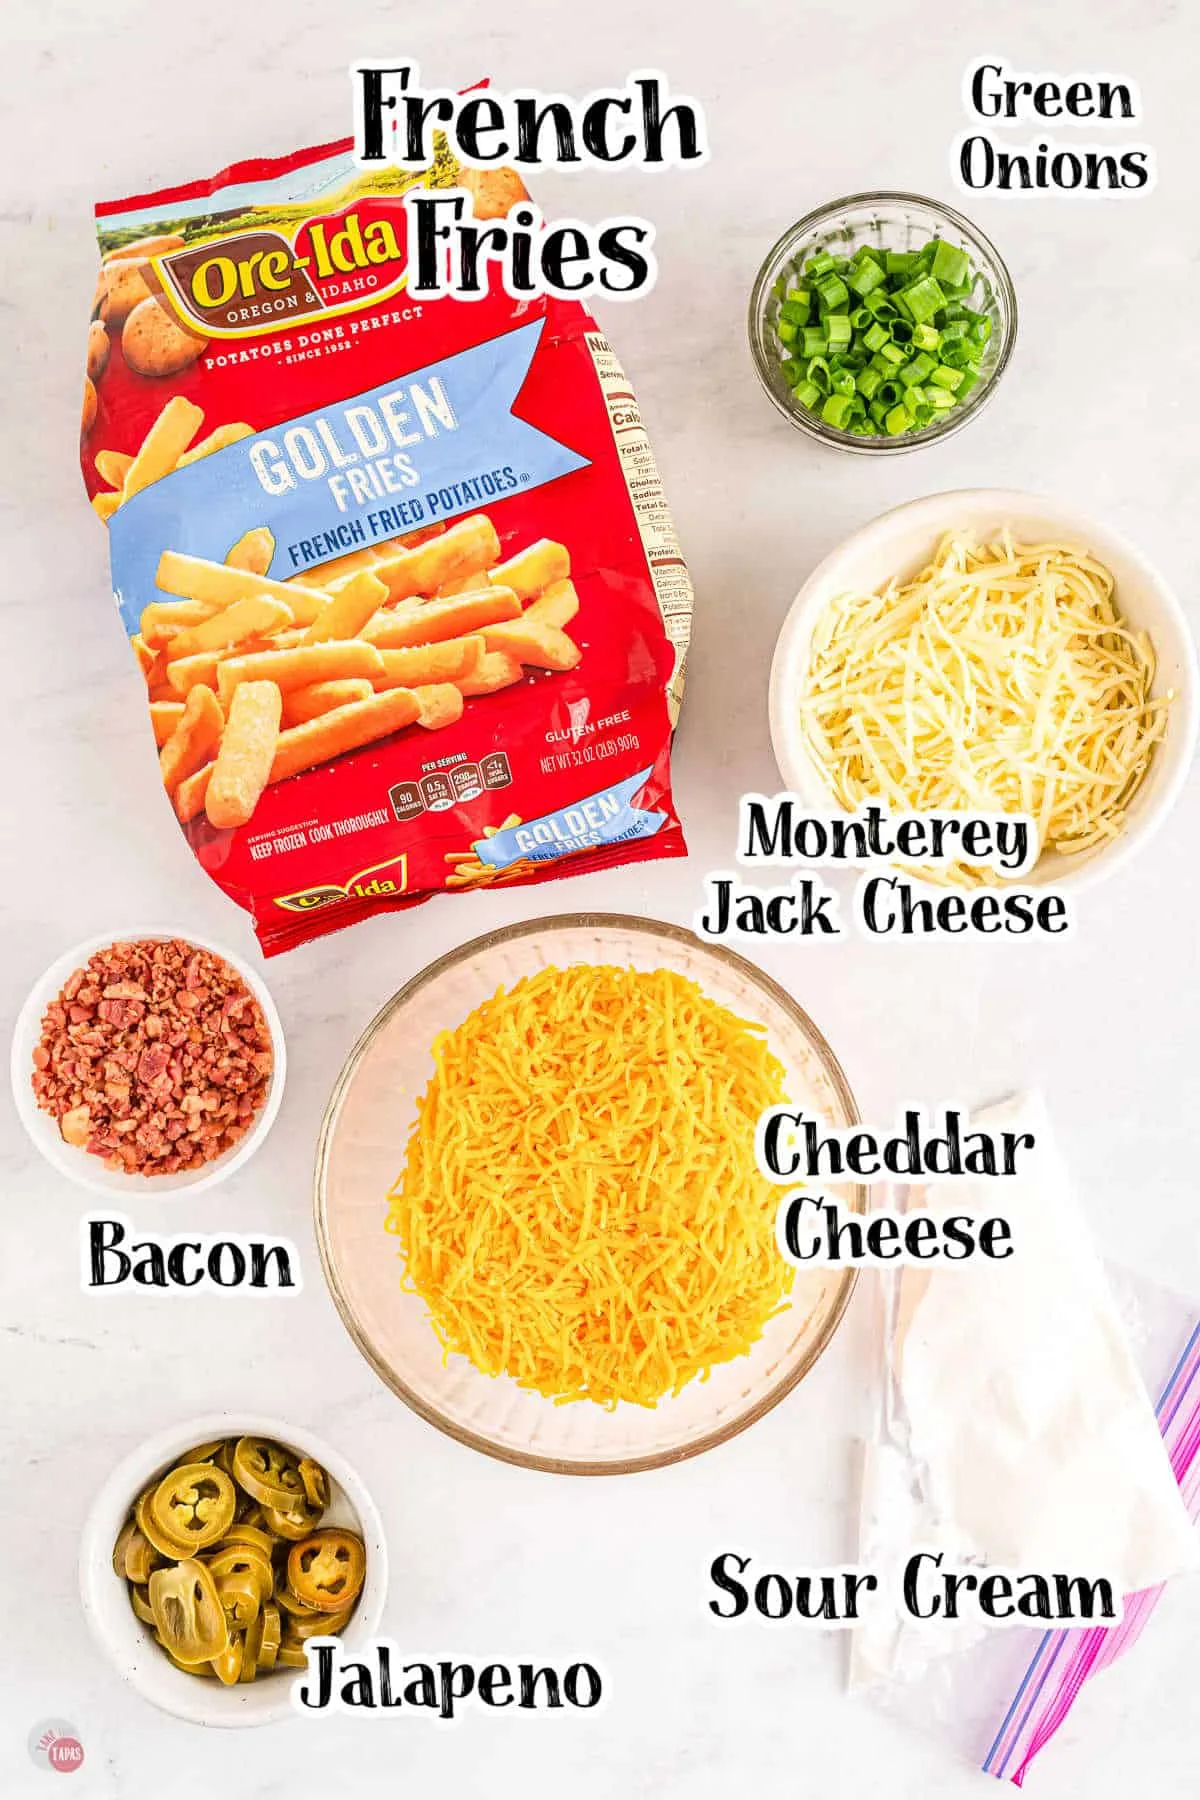 Top view of ingredients for loaded fries including a bag of frozen fries, and then bowls in various sizes filled with green onions, Monterey Jack cheese, bacon crumbles, jalapeños and at the bottom of the picture there is a freezer bag with sour cream in it.